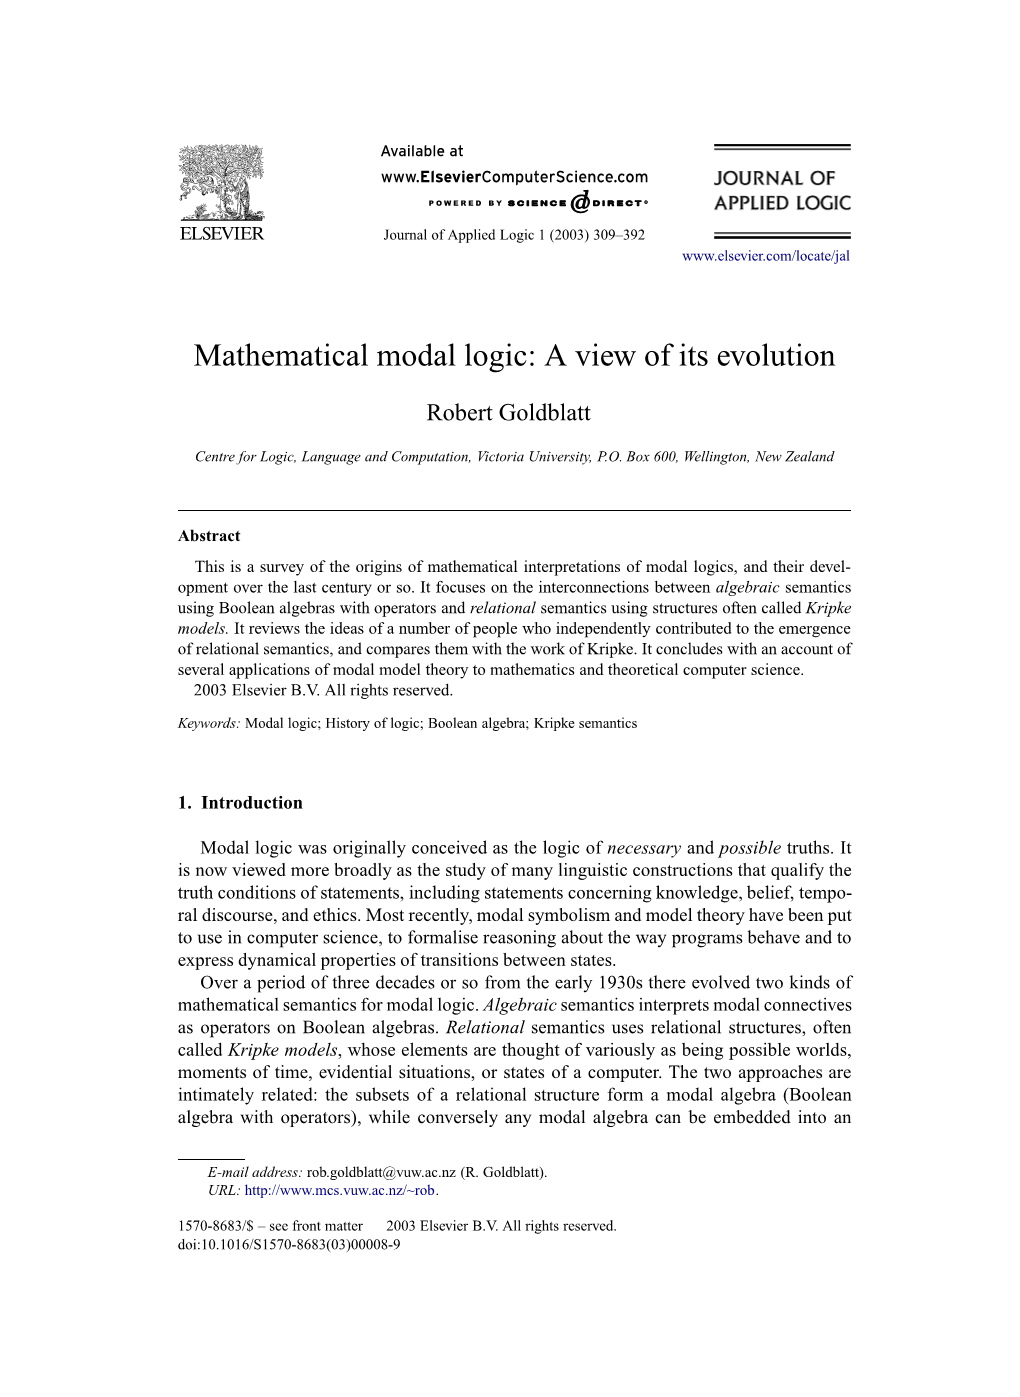 Mathematical Modal Logic: a View of Its Evolution